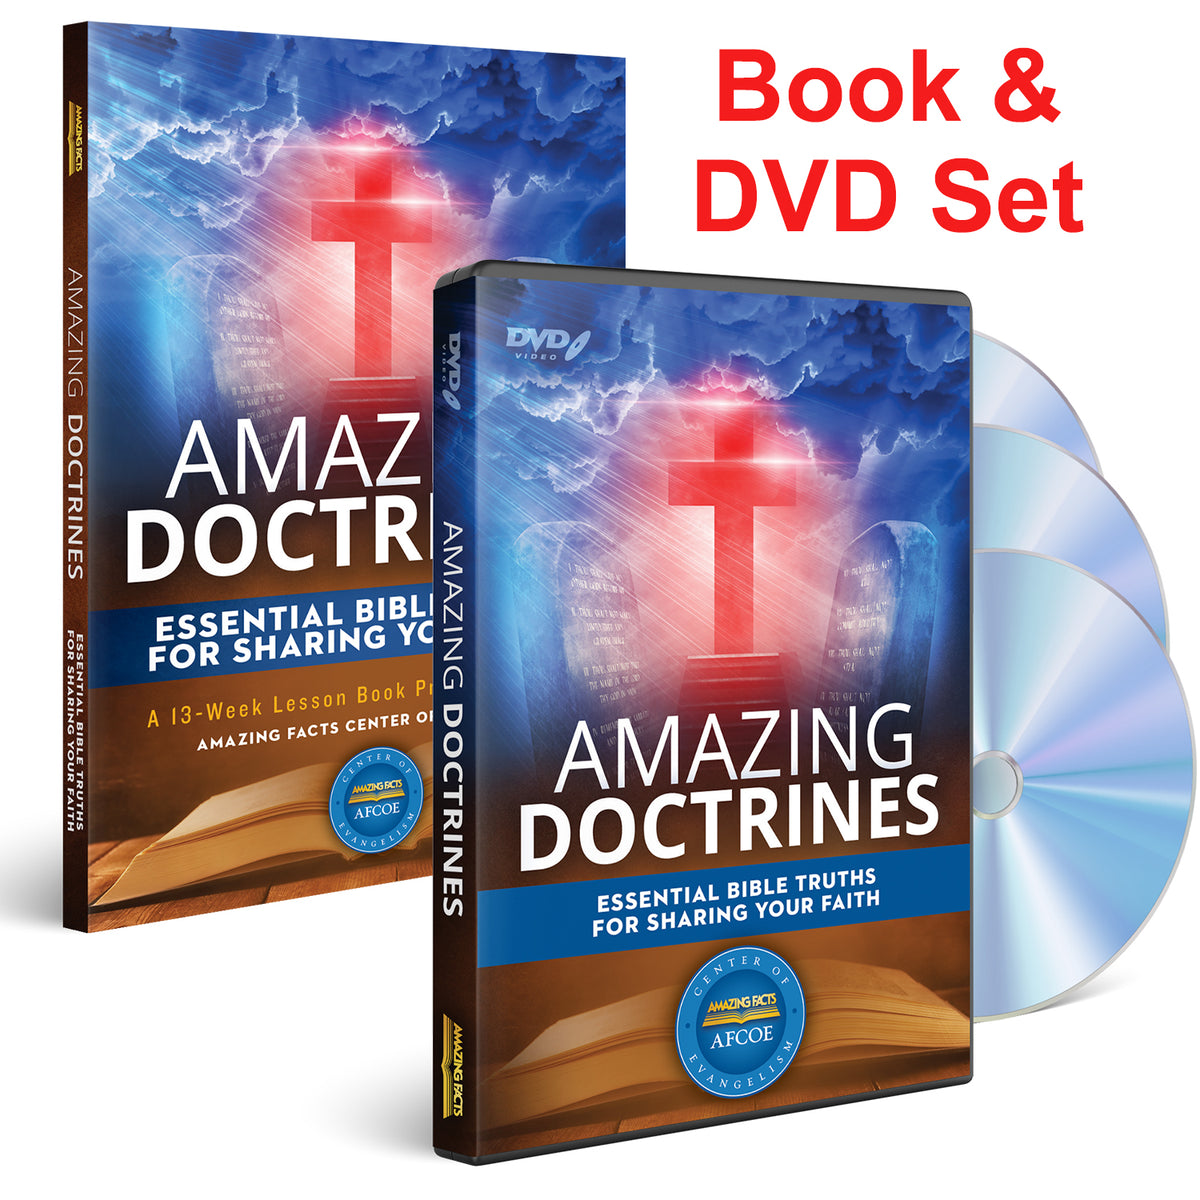 Amazing Doctrines DVD & Book Set by Amazing Facts